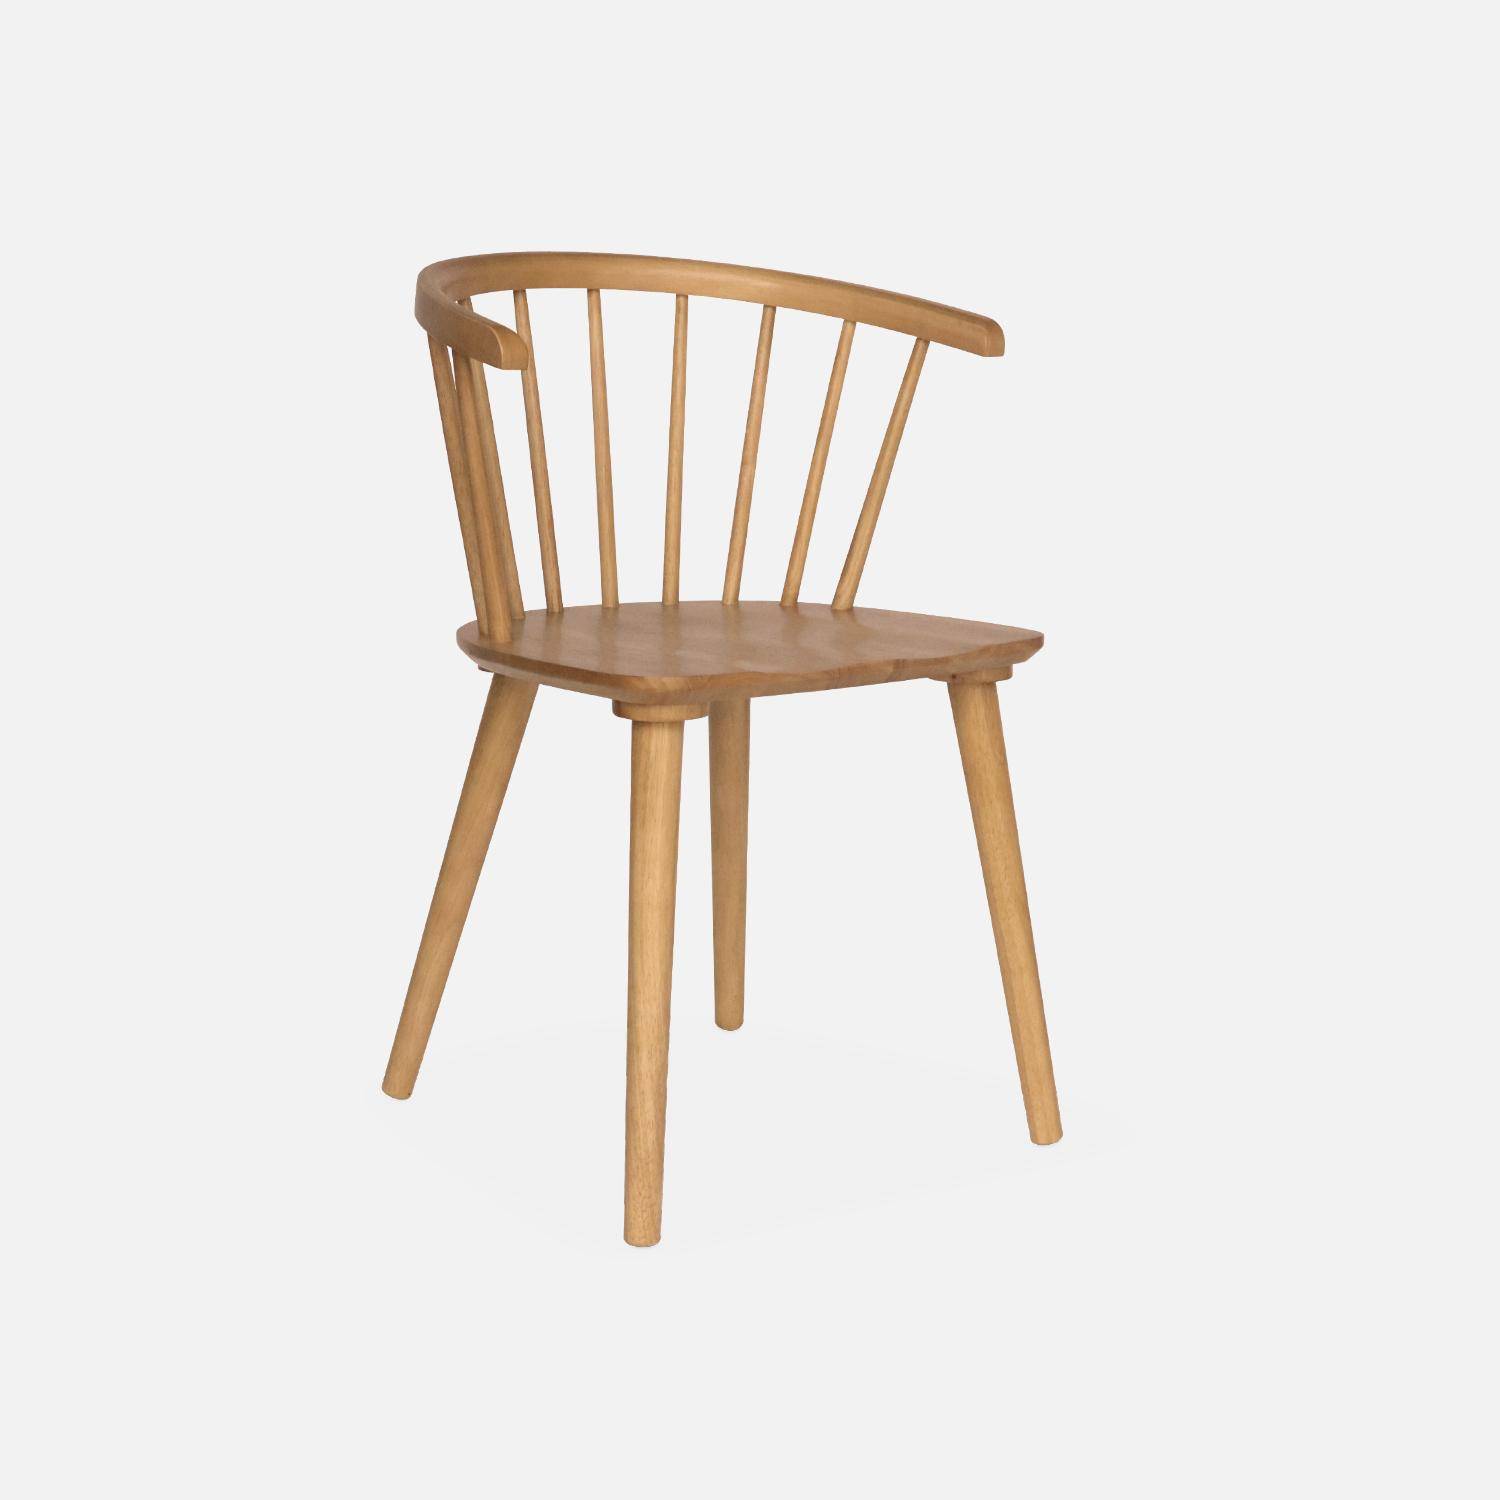 Pair of  Wood and Plywood Spindle Chairs, natural, L53 x W47.5 x H76cm ,sweeek,Photo6